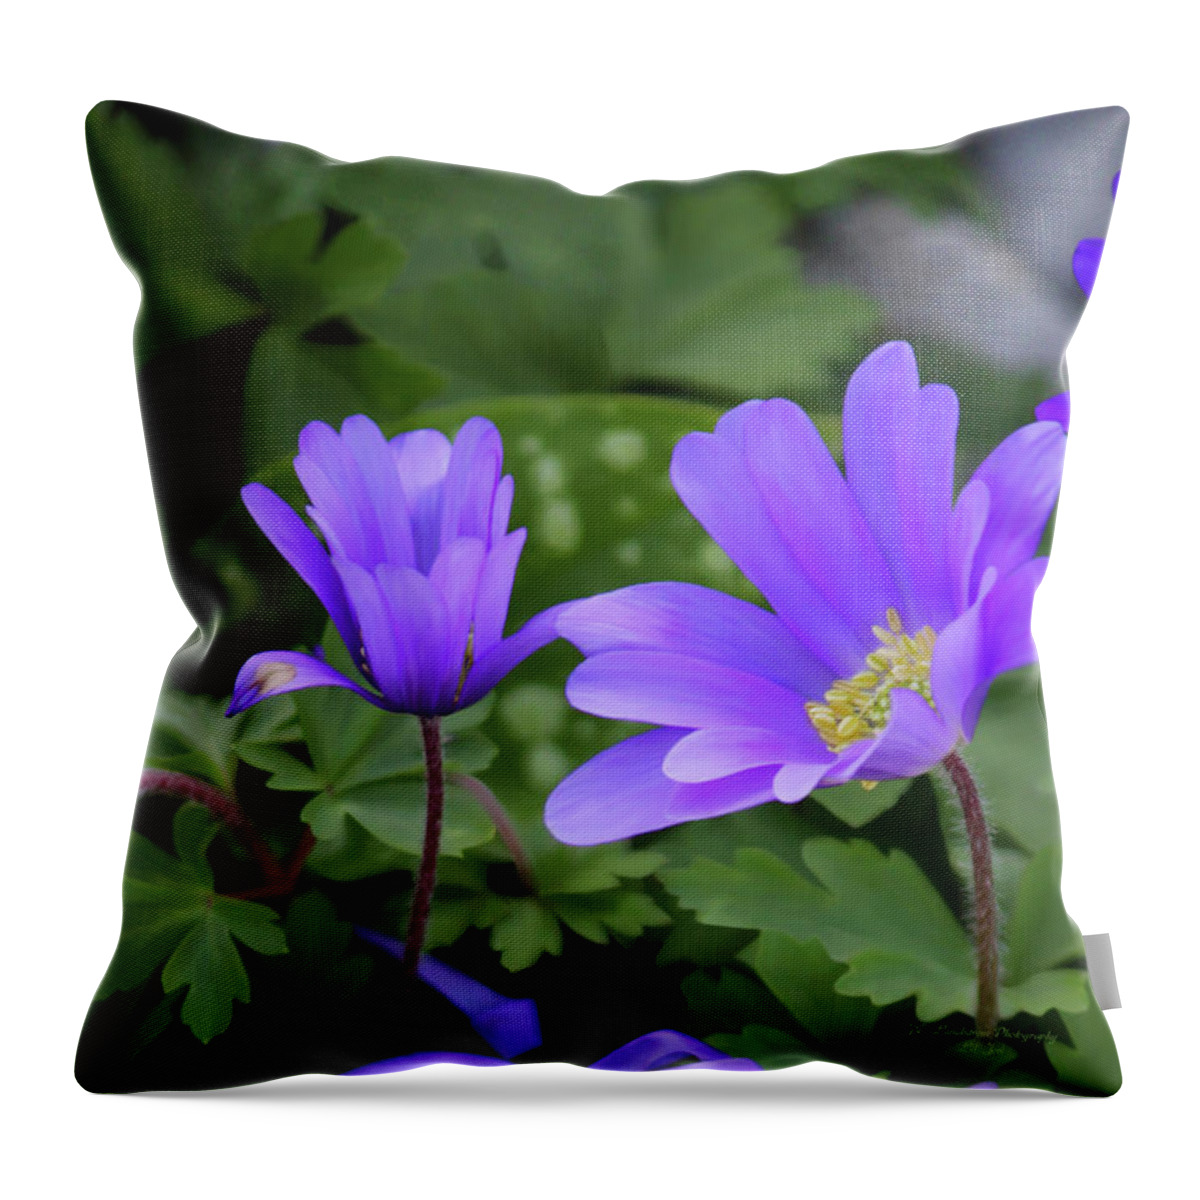 Tea Time Throw Pillow featuring the photograph Vinca In The Morning by Jeanette C Landstrom